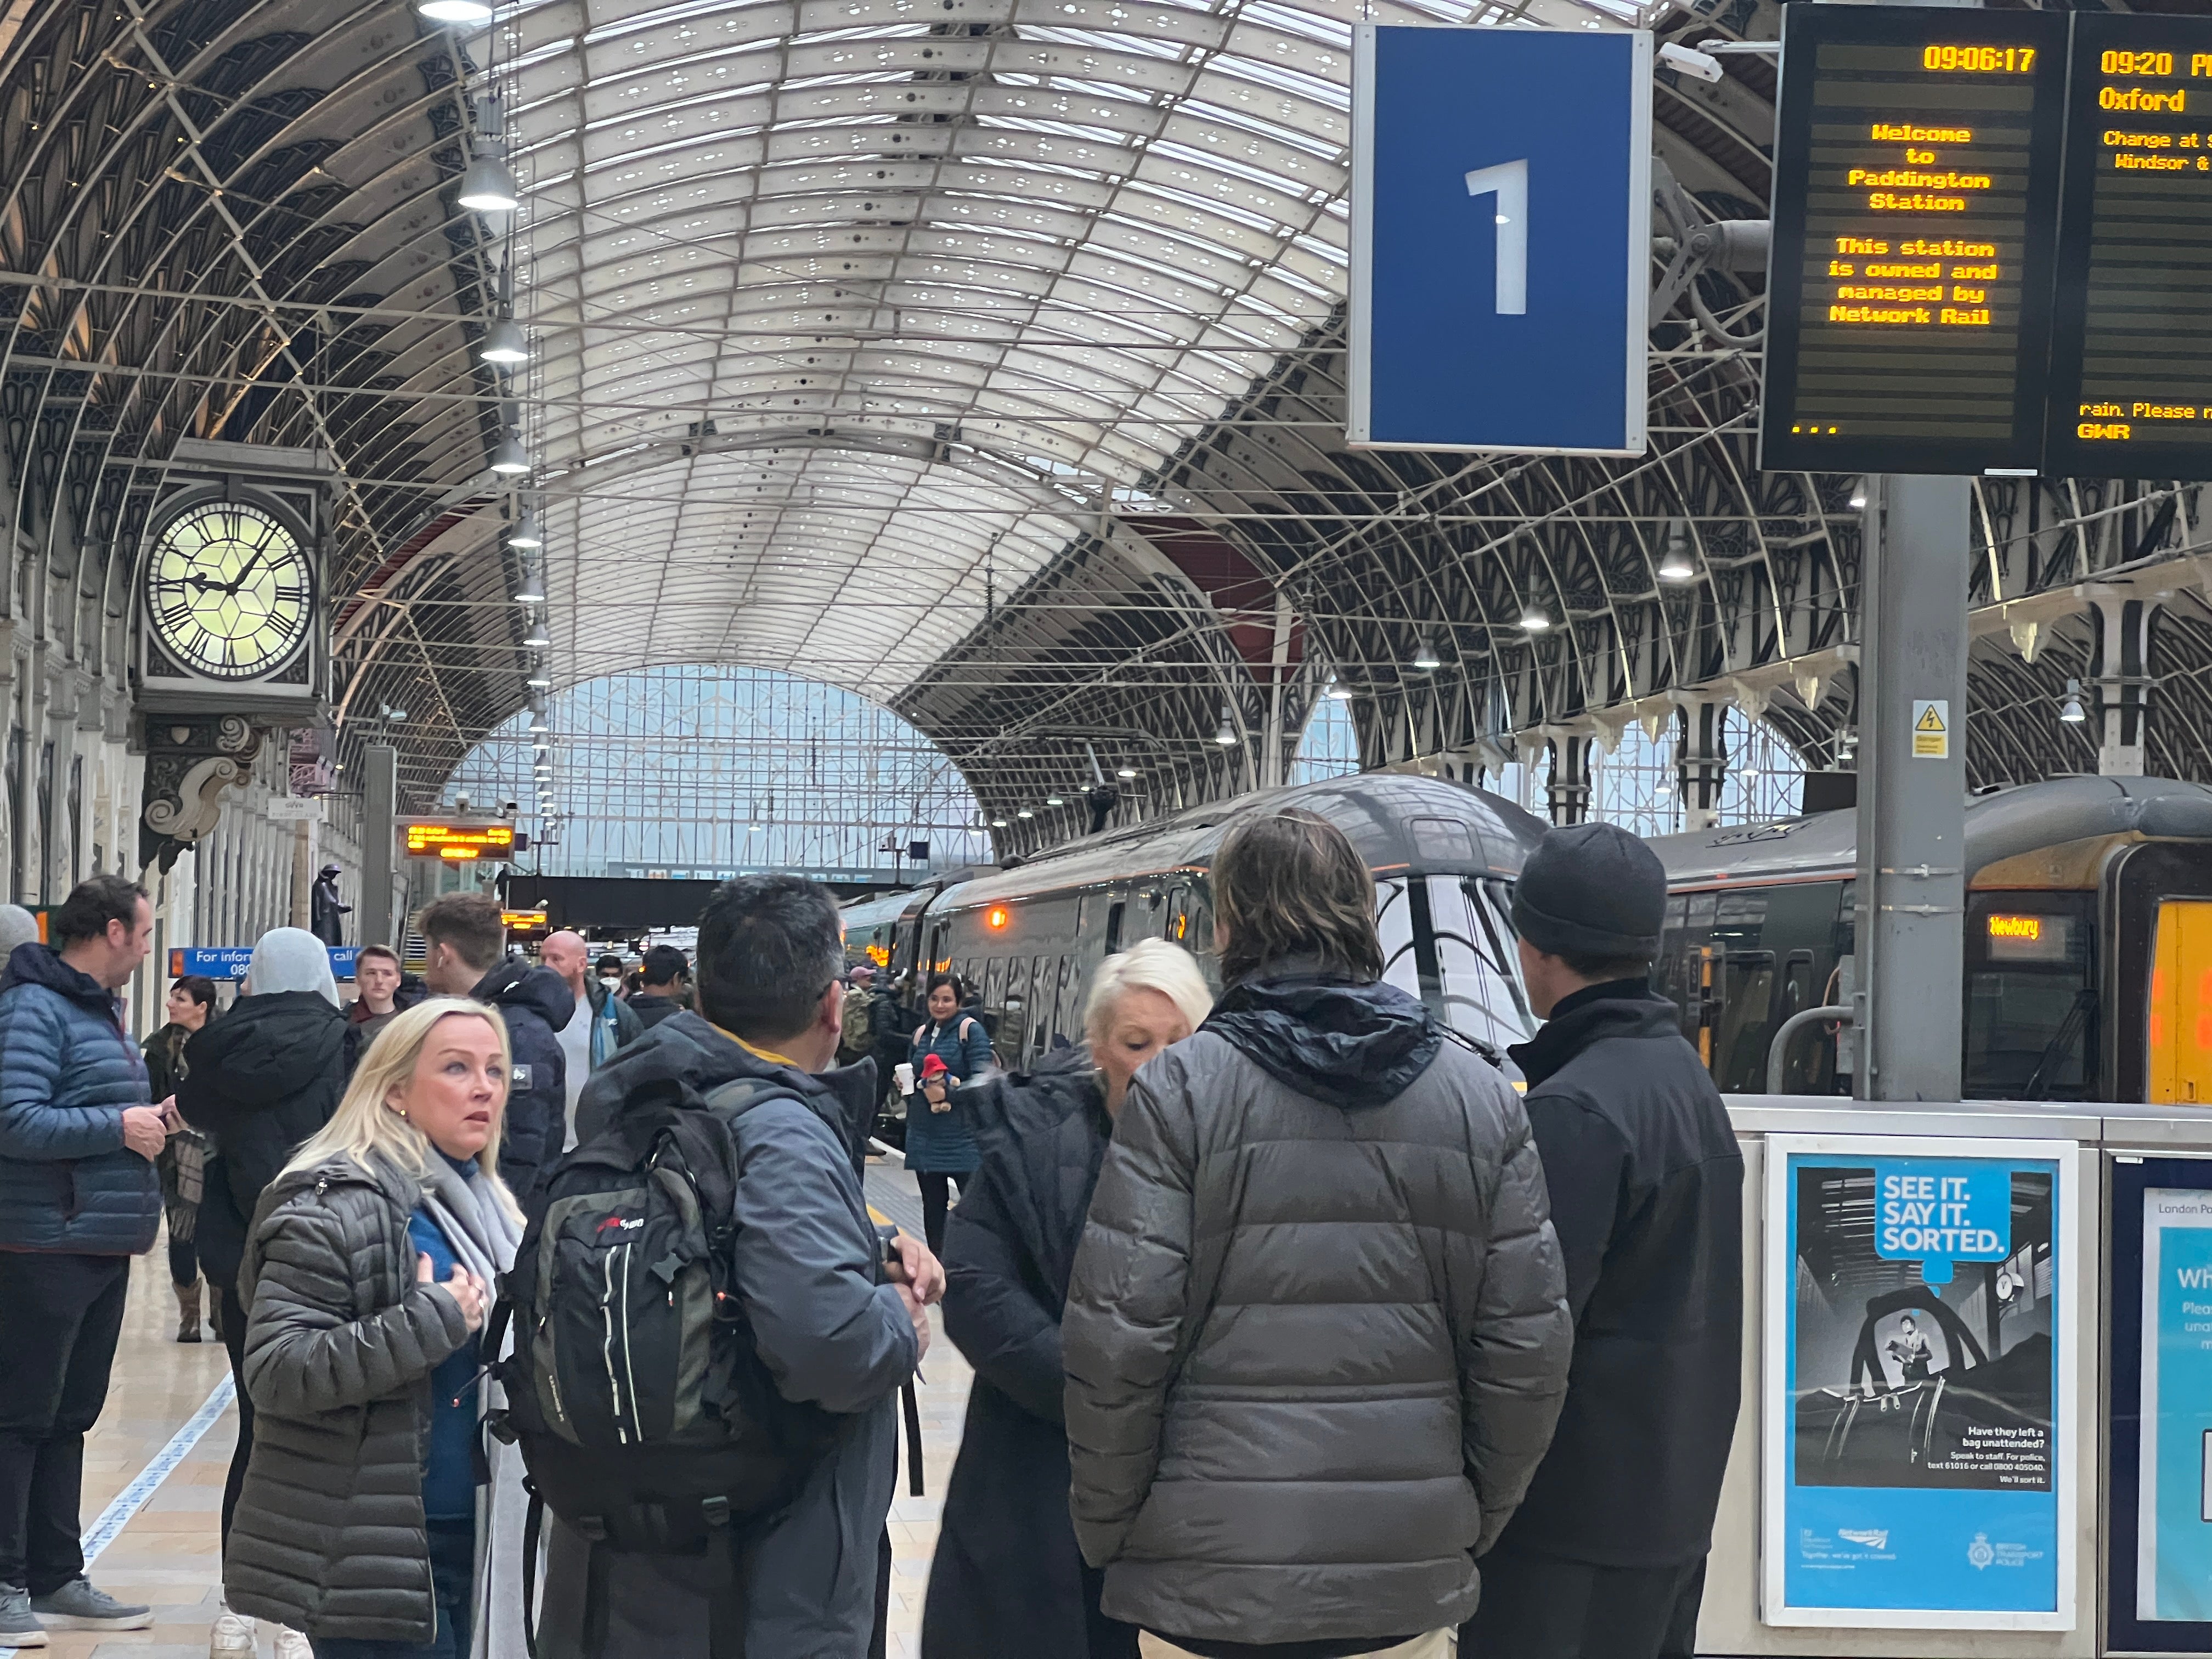 Expect delays: Platform 1 at Paddington station in London, hub for Great Western Railway